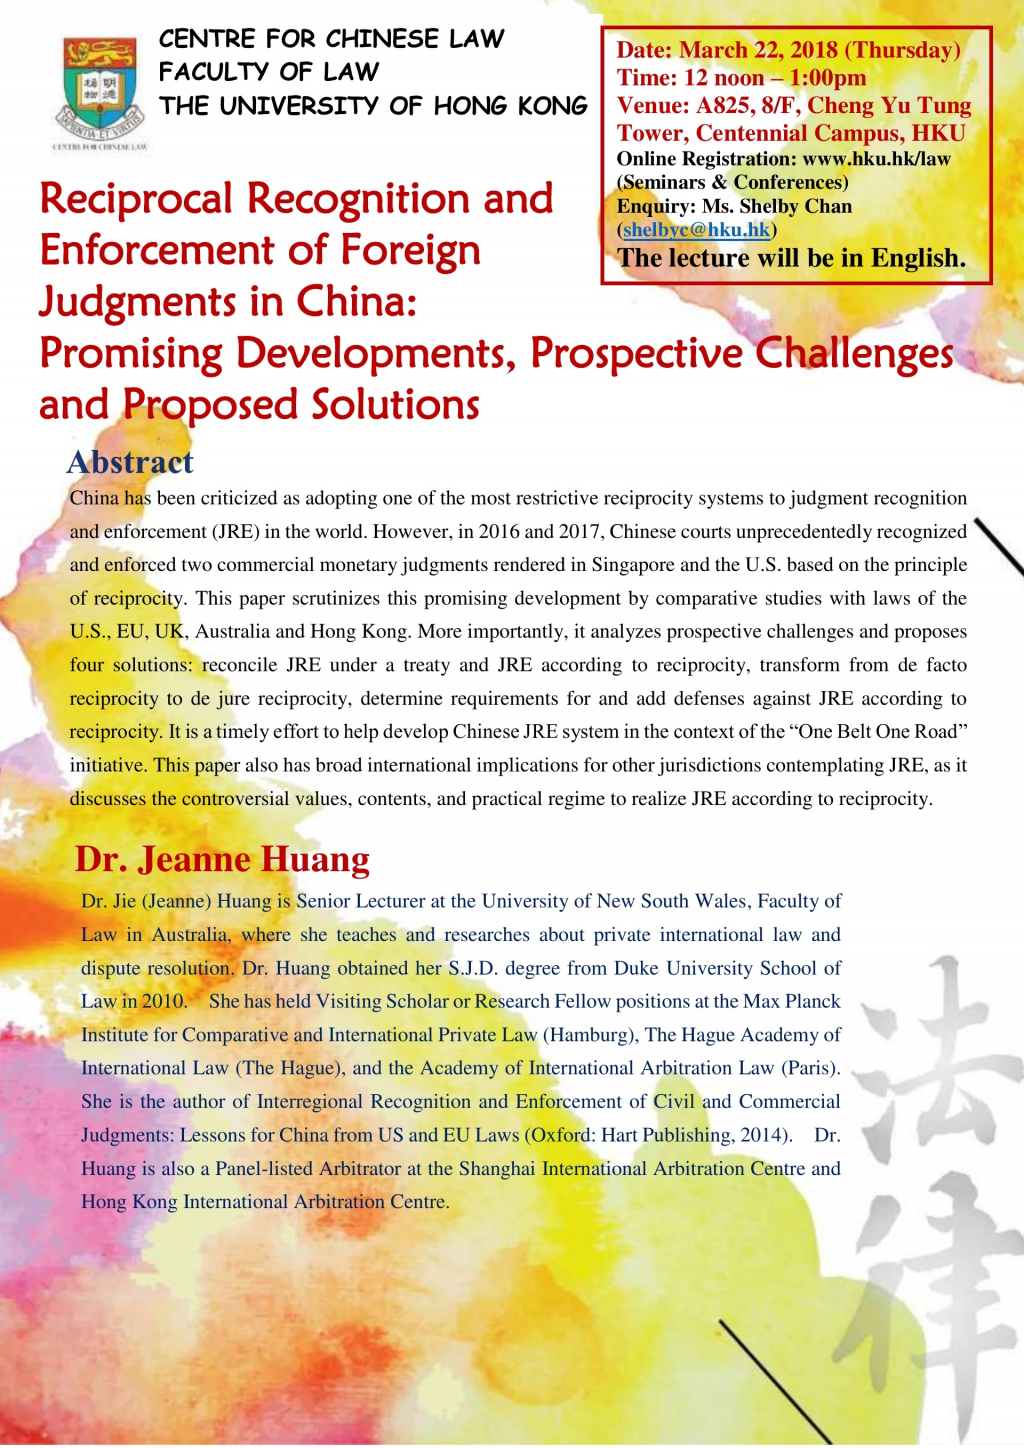 Reciprocal Recognition and Enforcement of Foreign Judgments in China